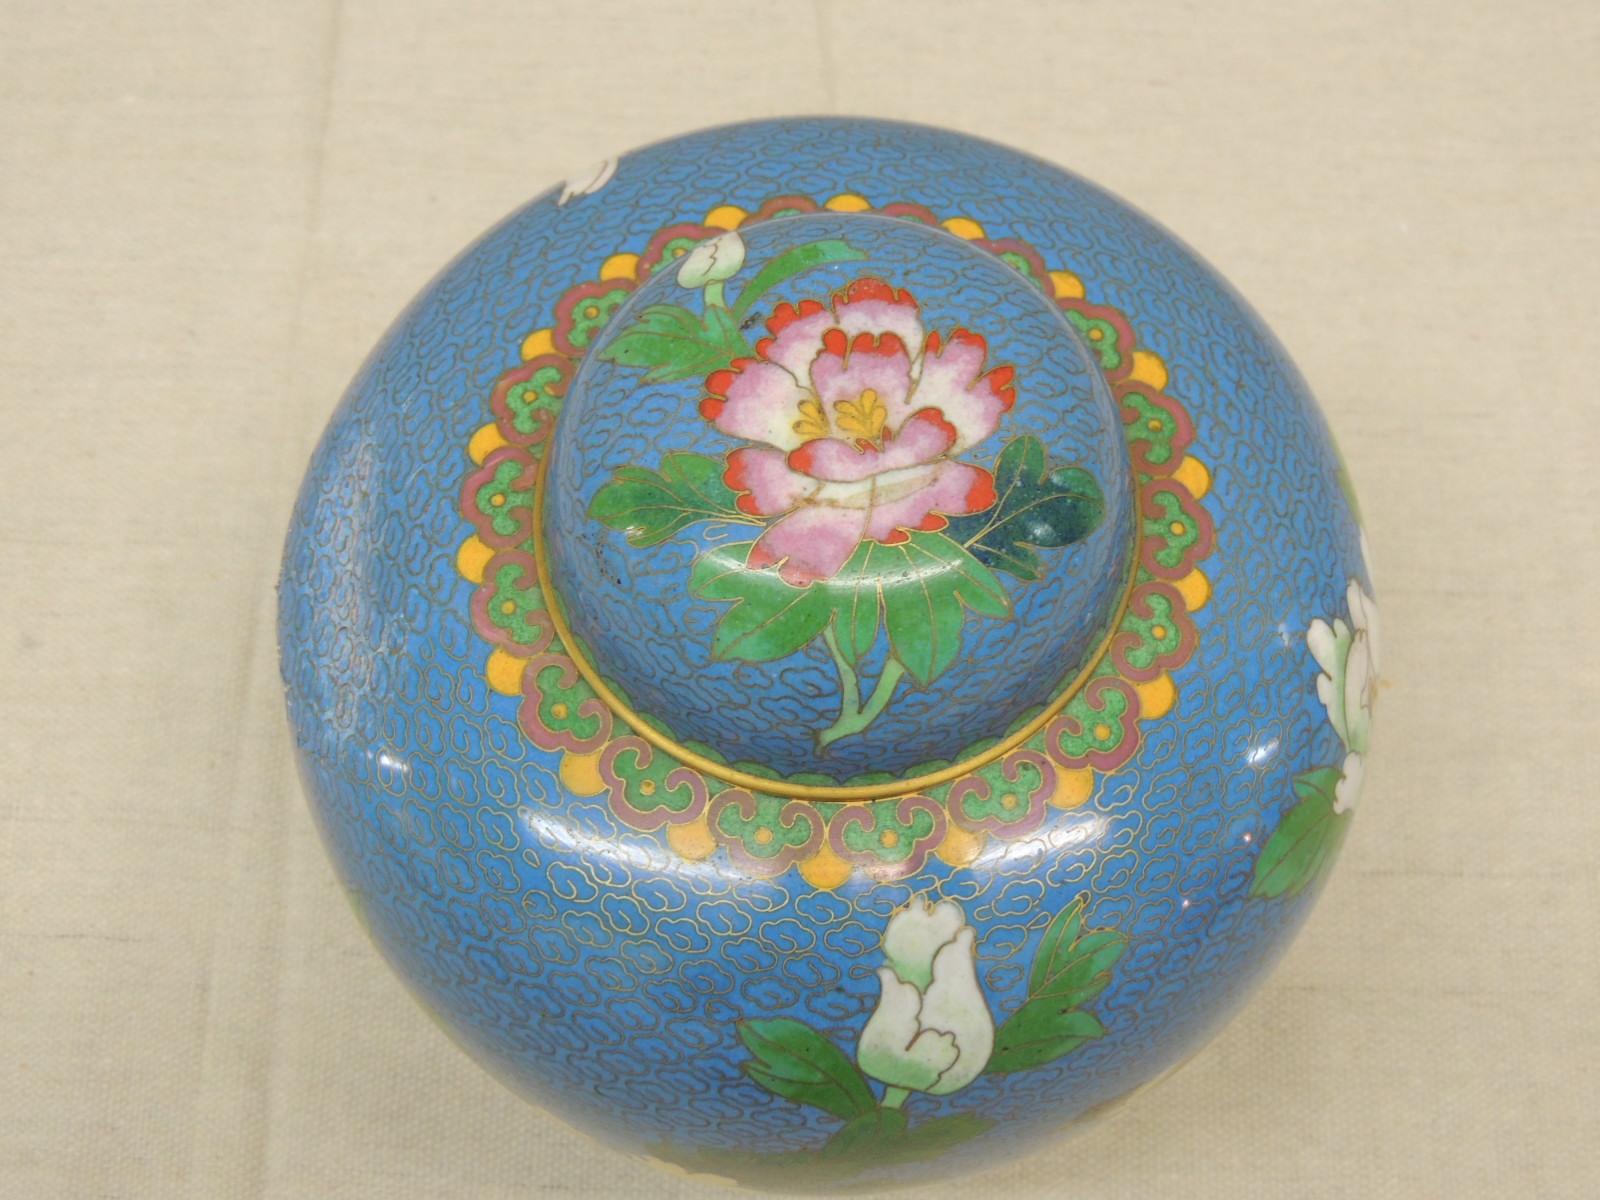 Vintage Ginger Jar shaped cloisonné vase with lid
Crackled surface depicting water lilies on one side and chrysanthemums on the other side. Small dent on the side: Sold as is. (See last picture to consider.) Otherwise an amazing collectible item.